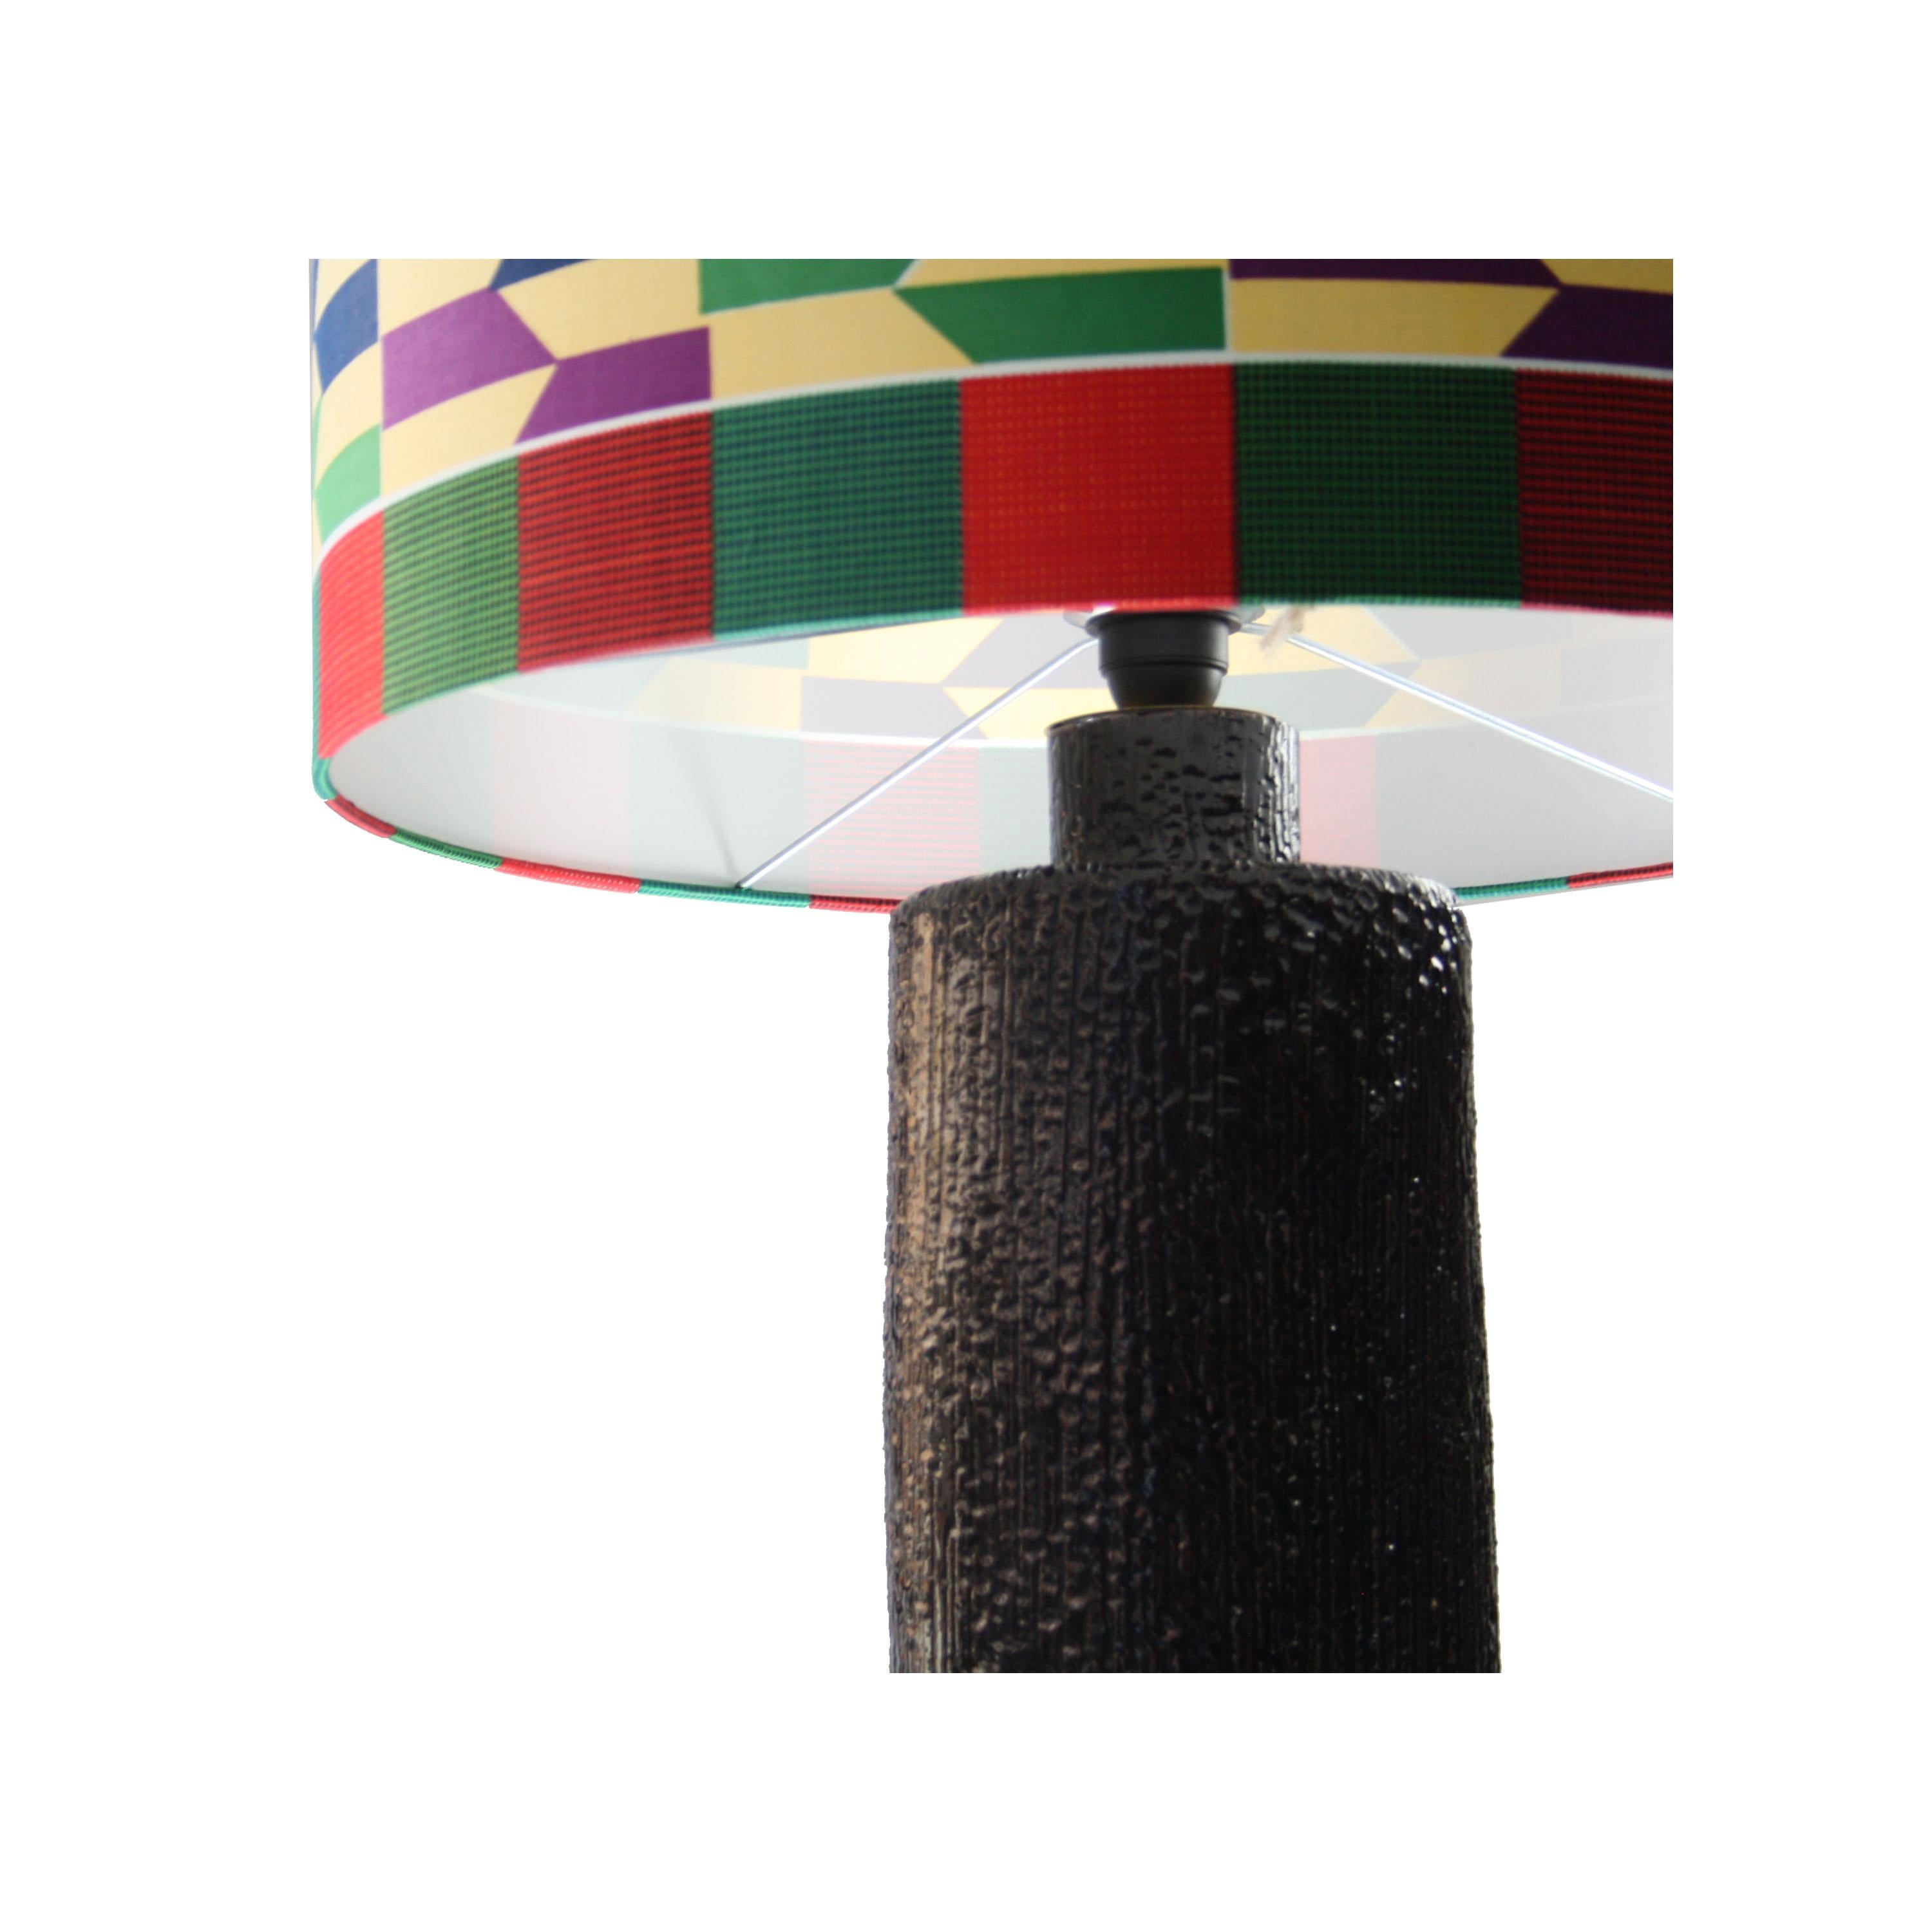 Cylindrical lamp designed by Emilio Rey, with black handmade ceramic base and lampshade in Kitenge fabric. Piece made to order in 1950.